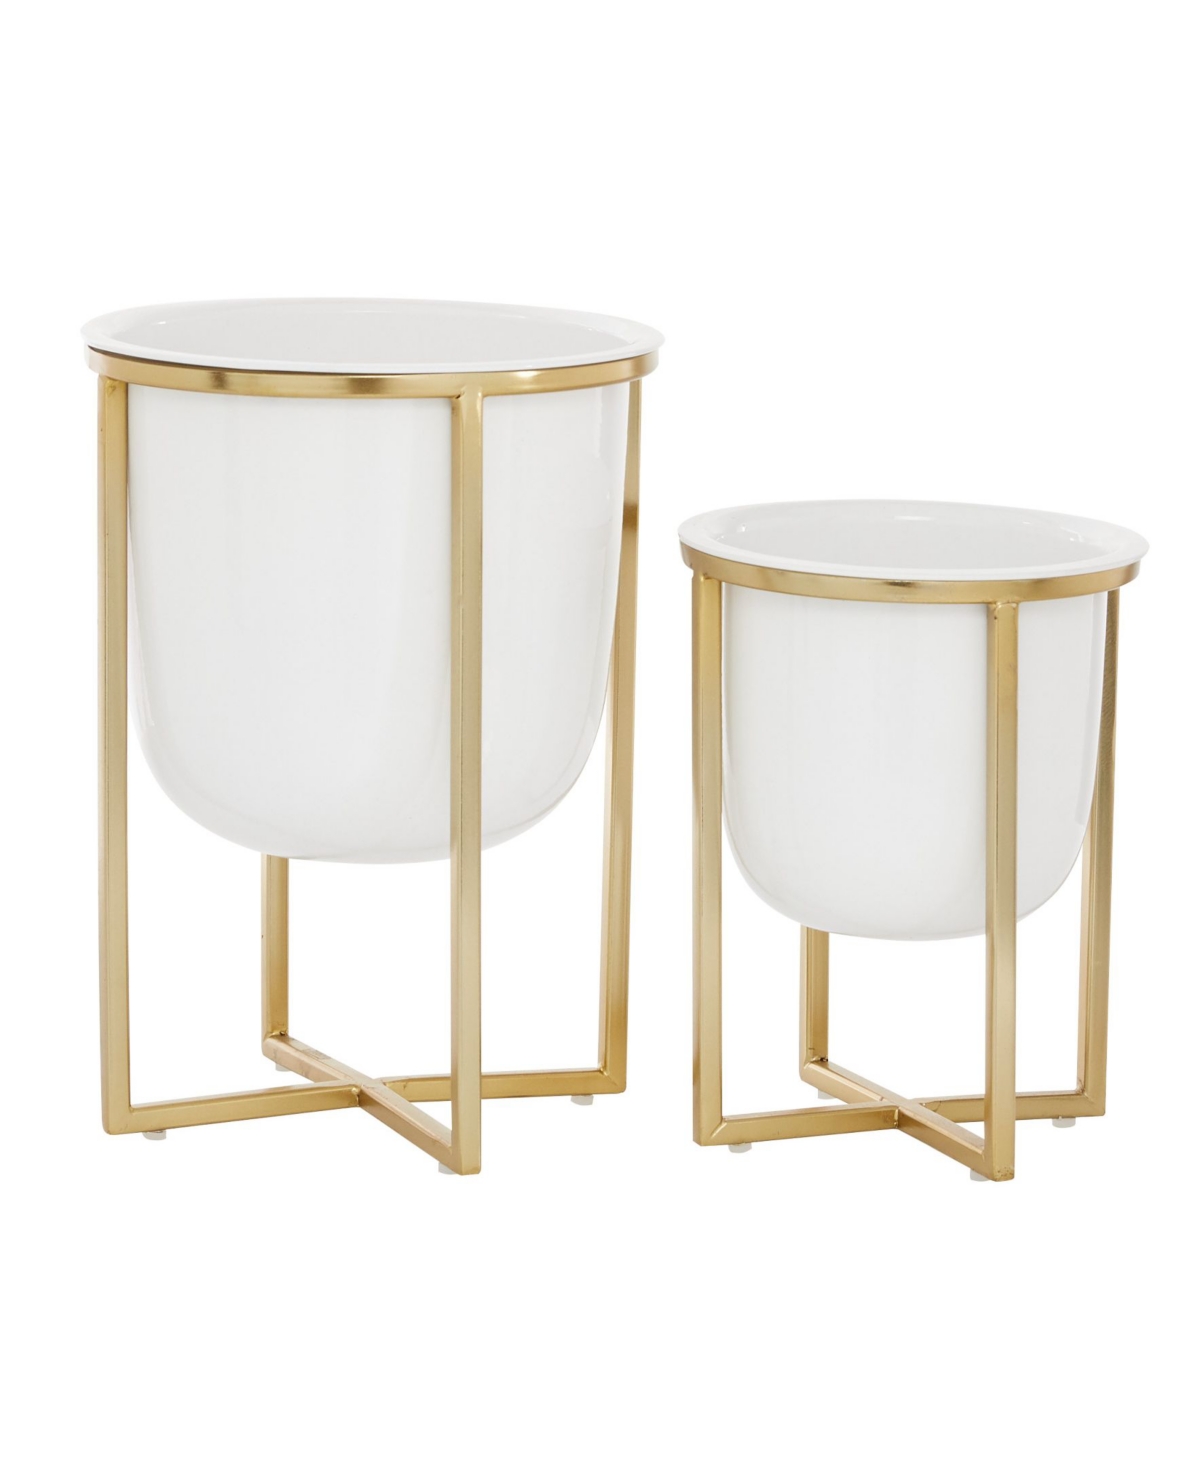 by Cosmopolitan Contemporary Planters with Stand, Set of 2 - White Medium